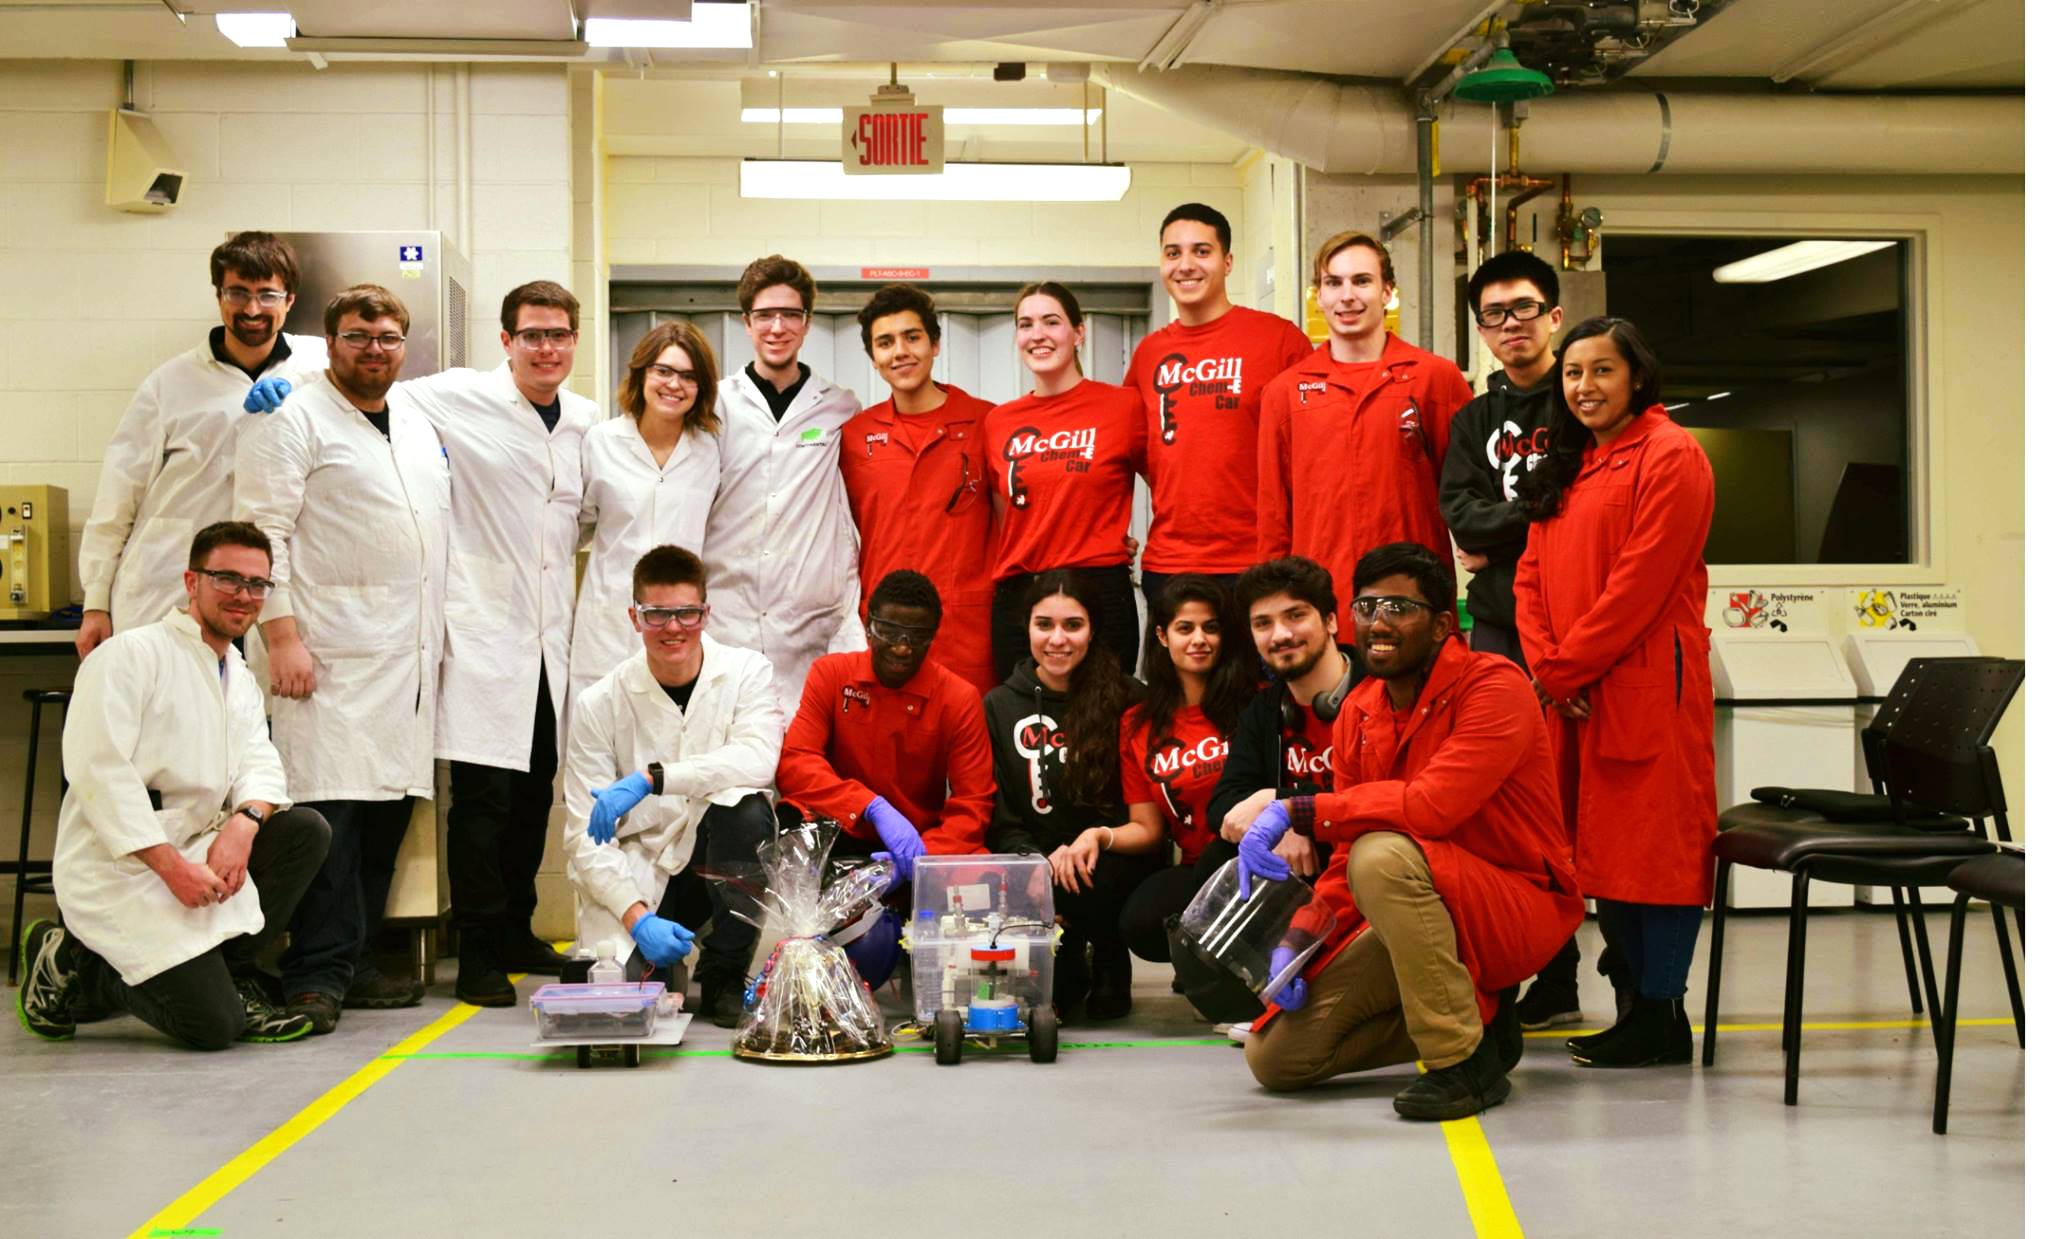 Pittsburgh 2018, Nationals Chem-E Car Competition  
October 26th - 29th 2018